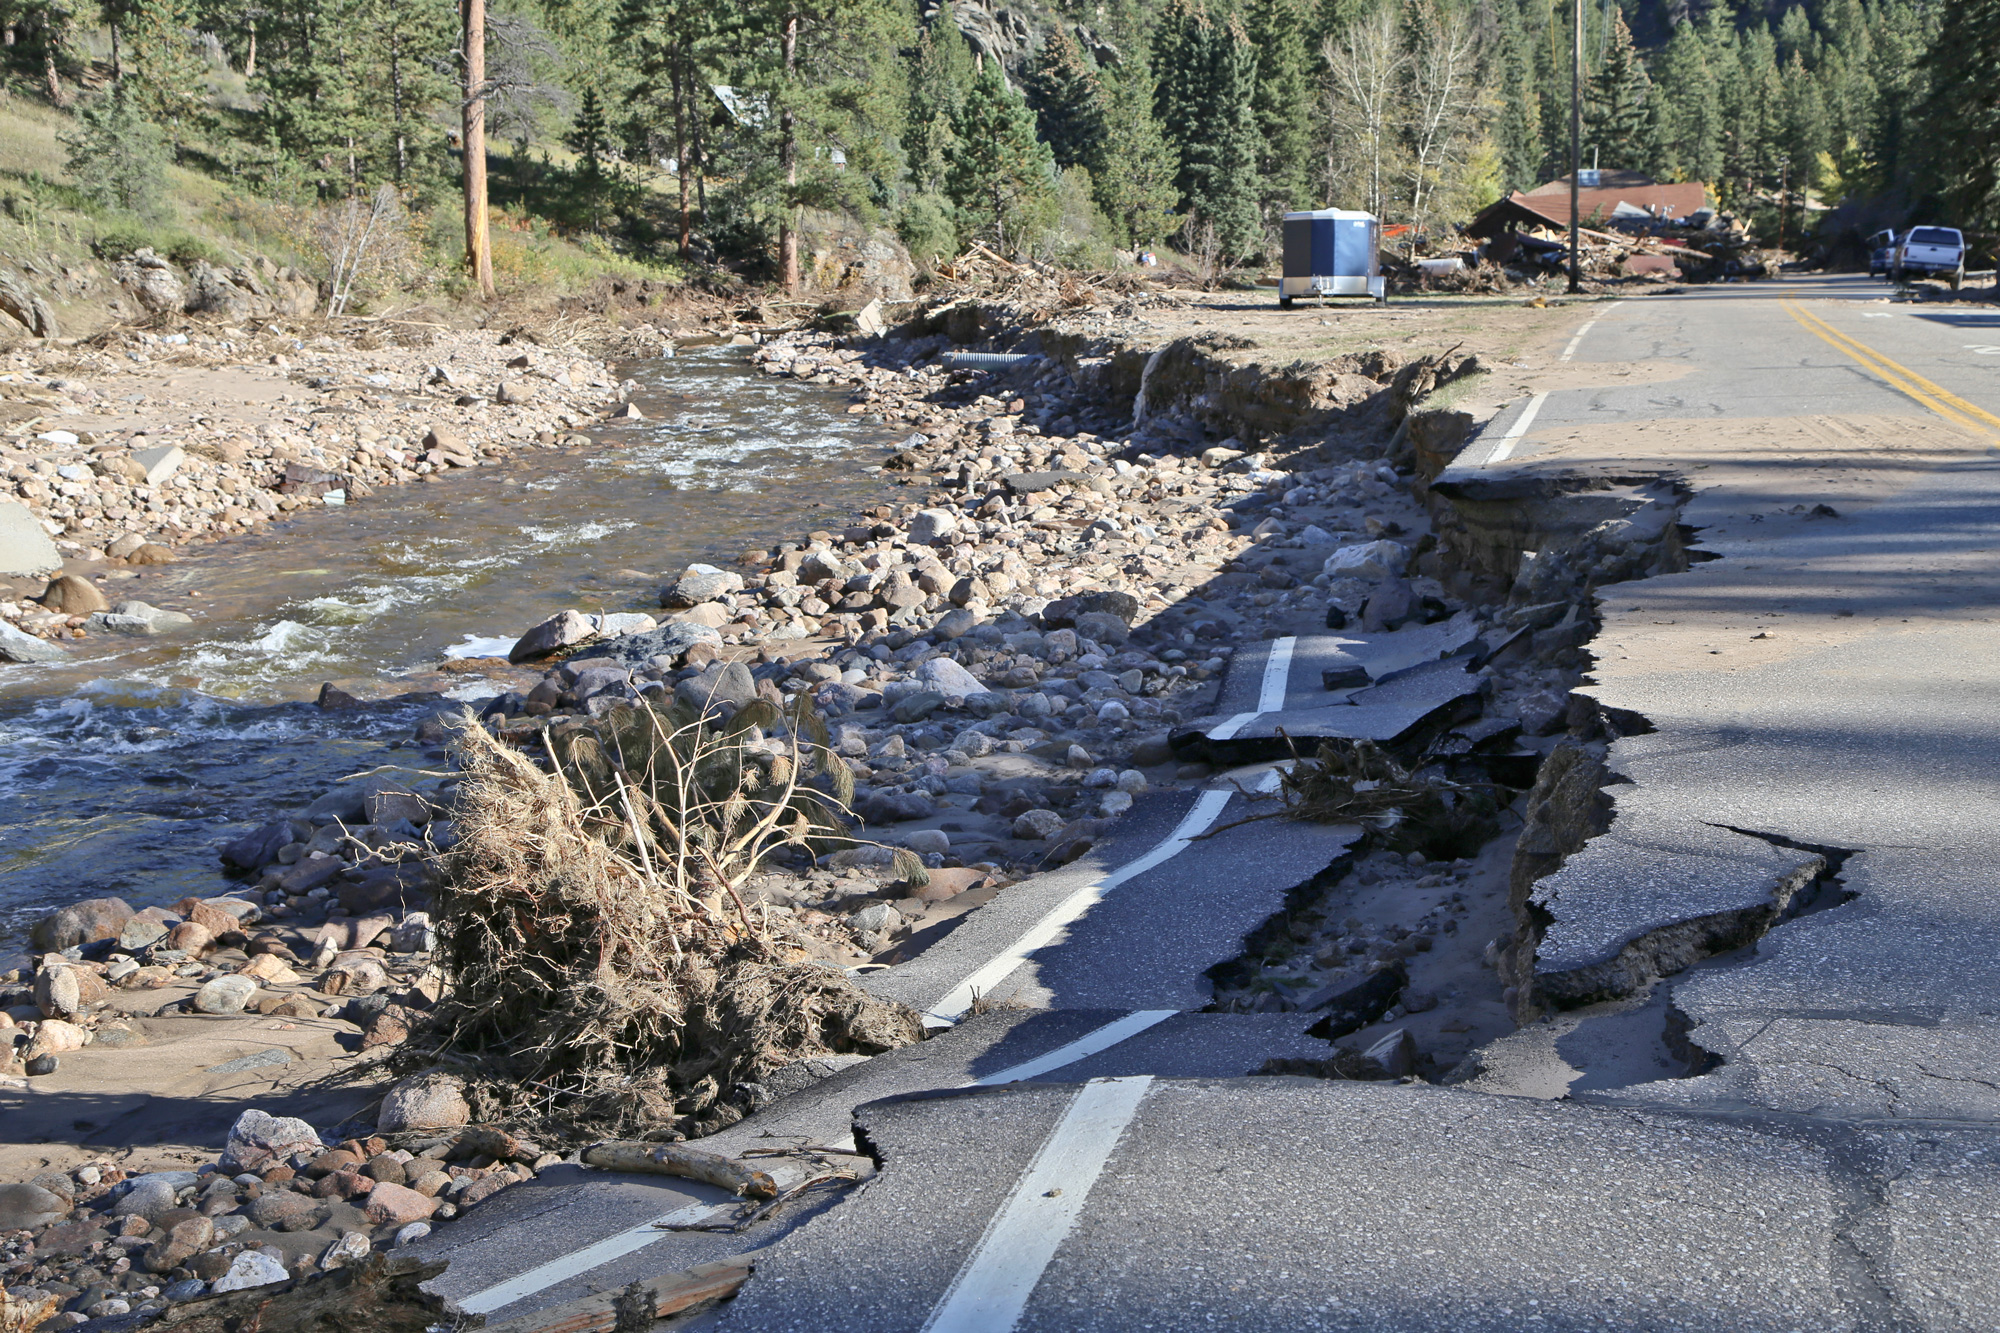 Road damage from bank erosion as a result of the September 2013 flood event in Boulder and Larimer counties. Photo credit: Jon White for the CGS.